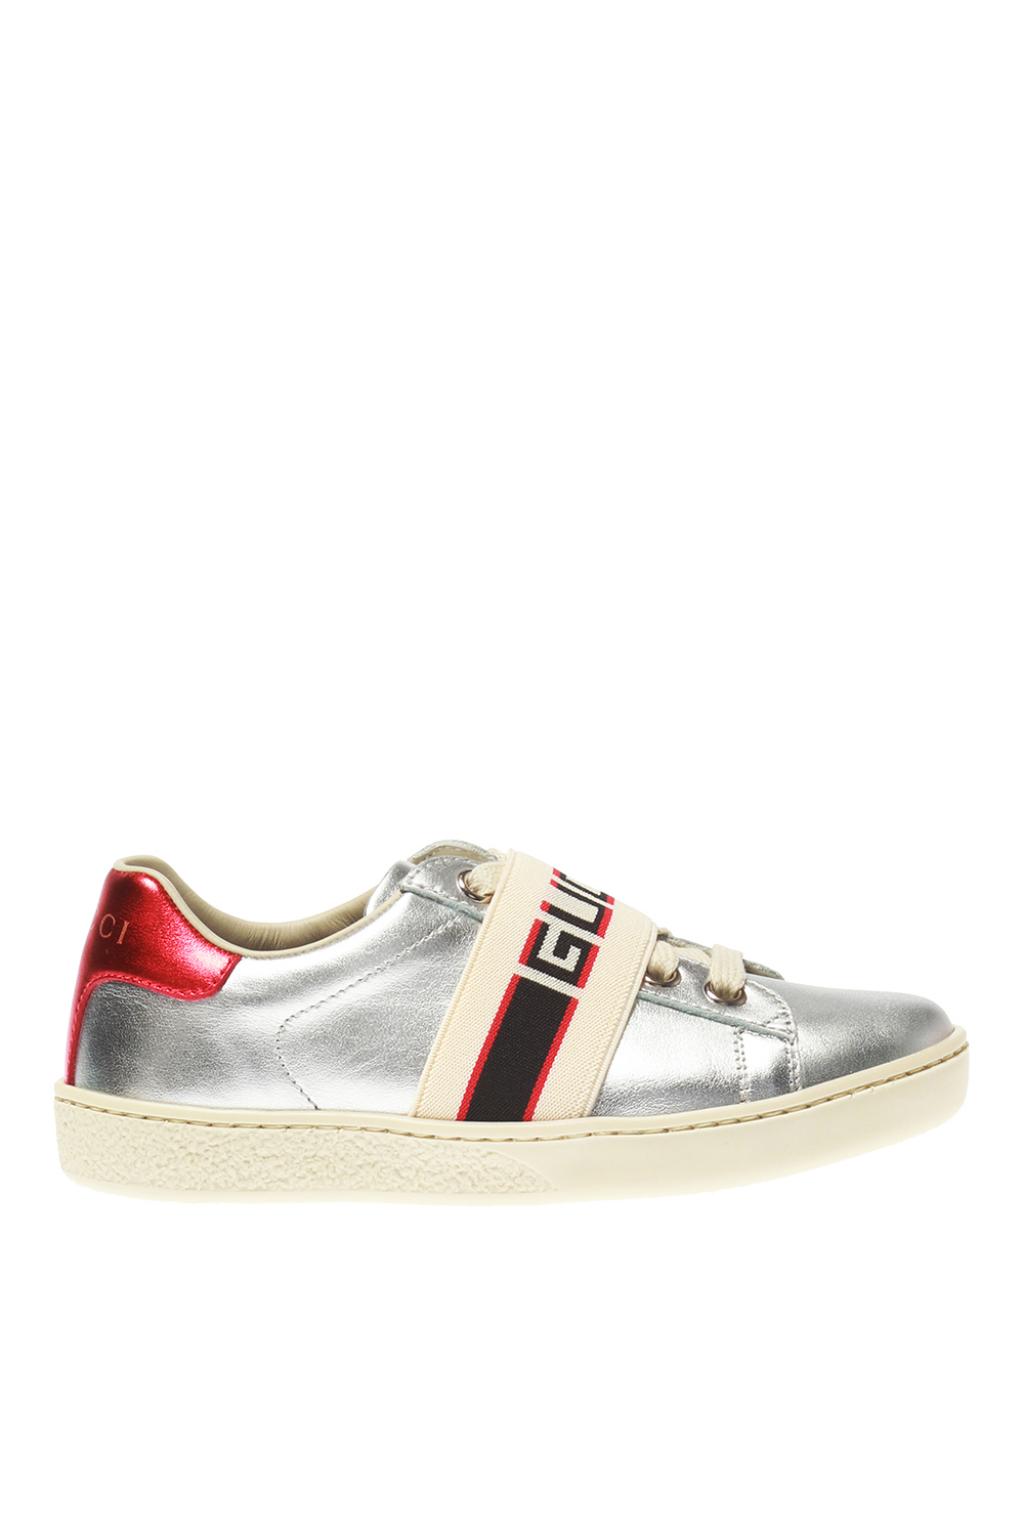 gucci ace sneakers kids